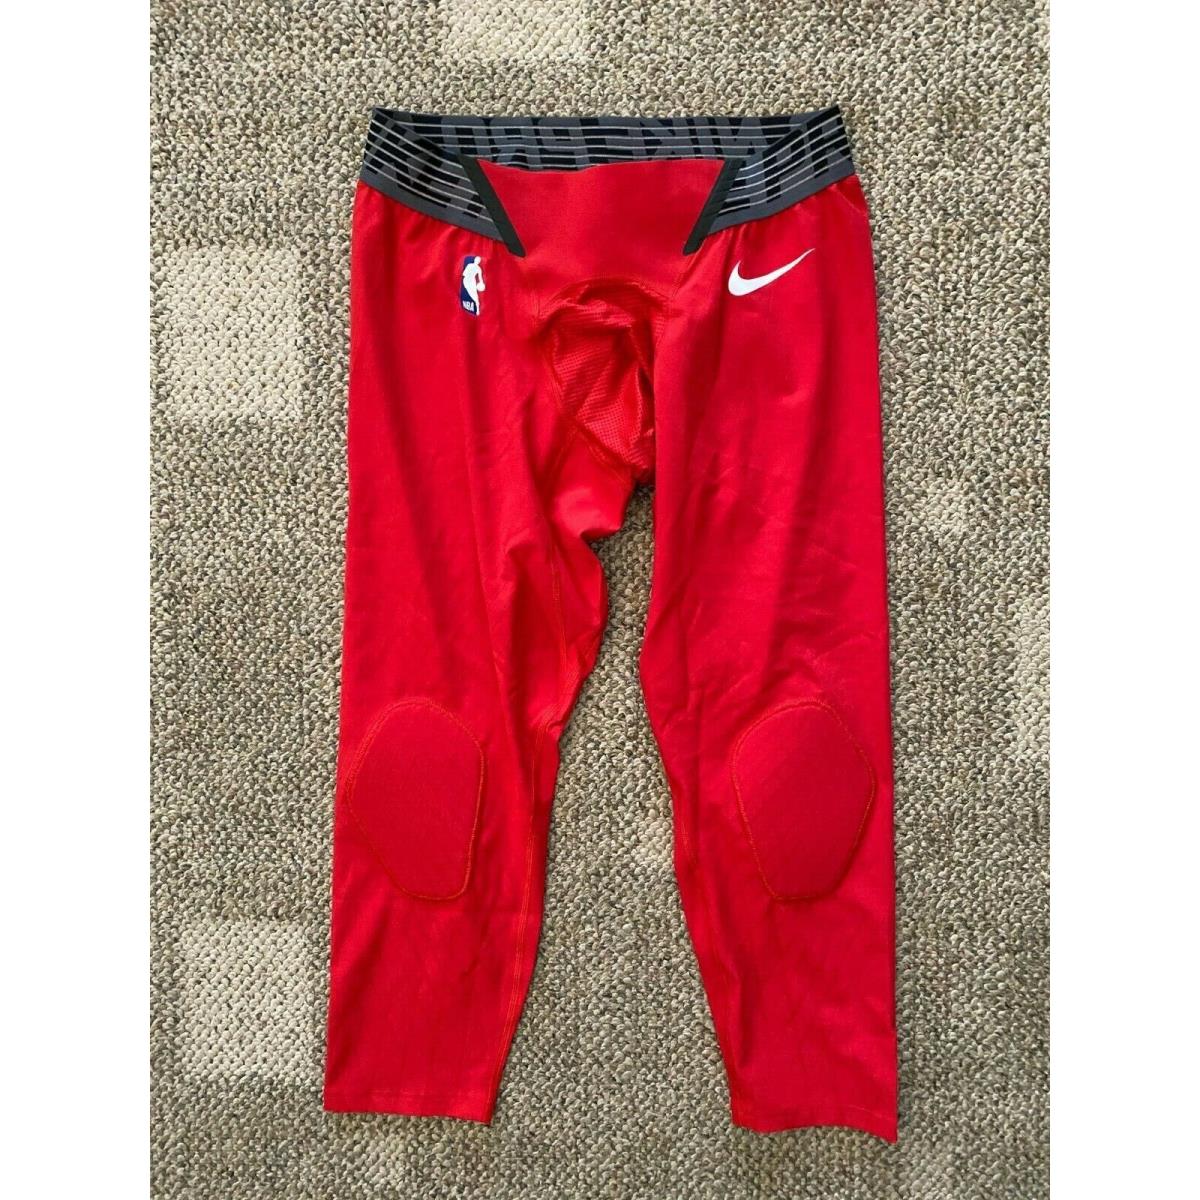 Nike Men`s Small Pro Zonal Strength Nba Basketball Tights Padded Red 881017-657